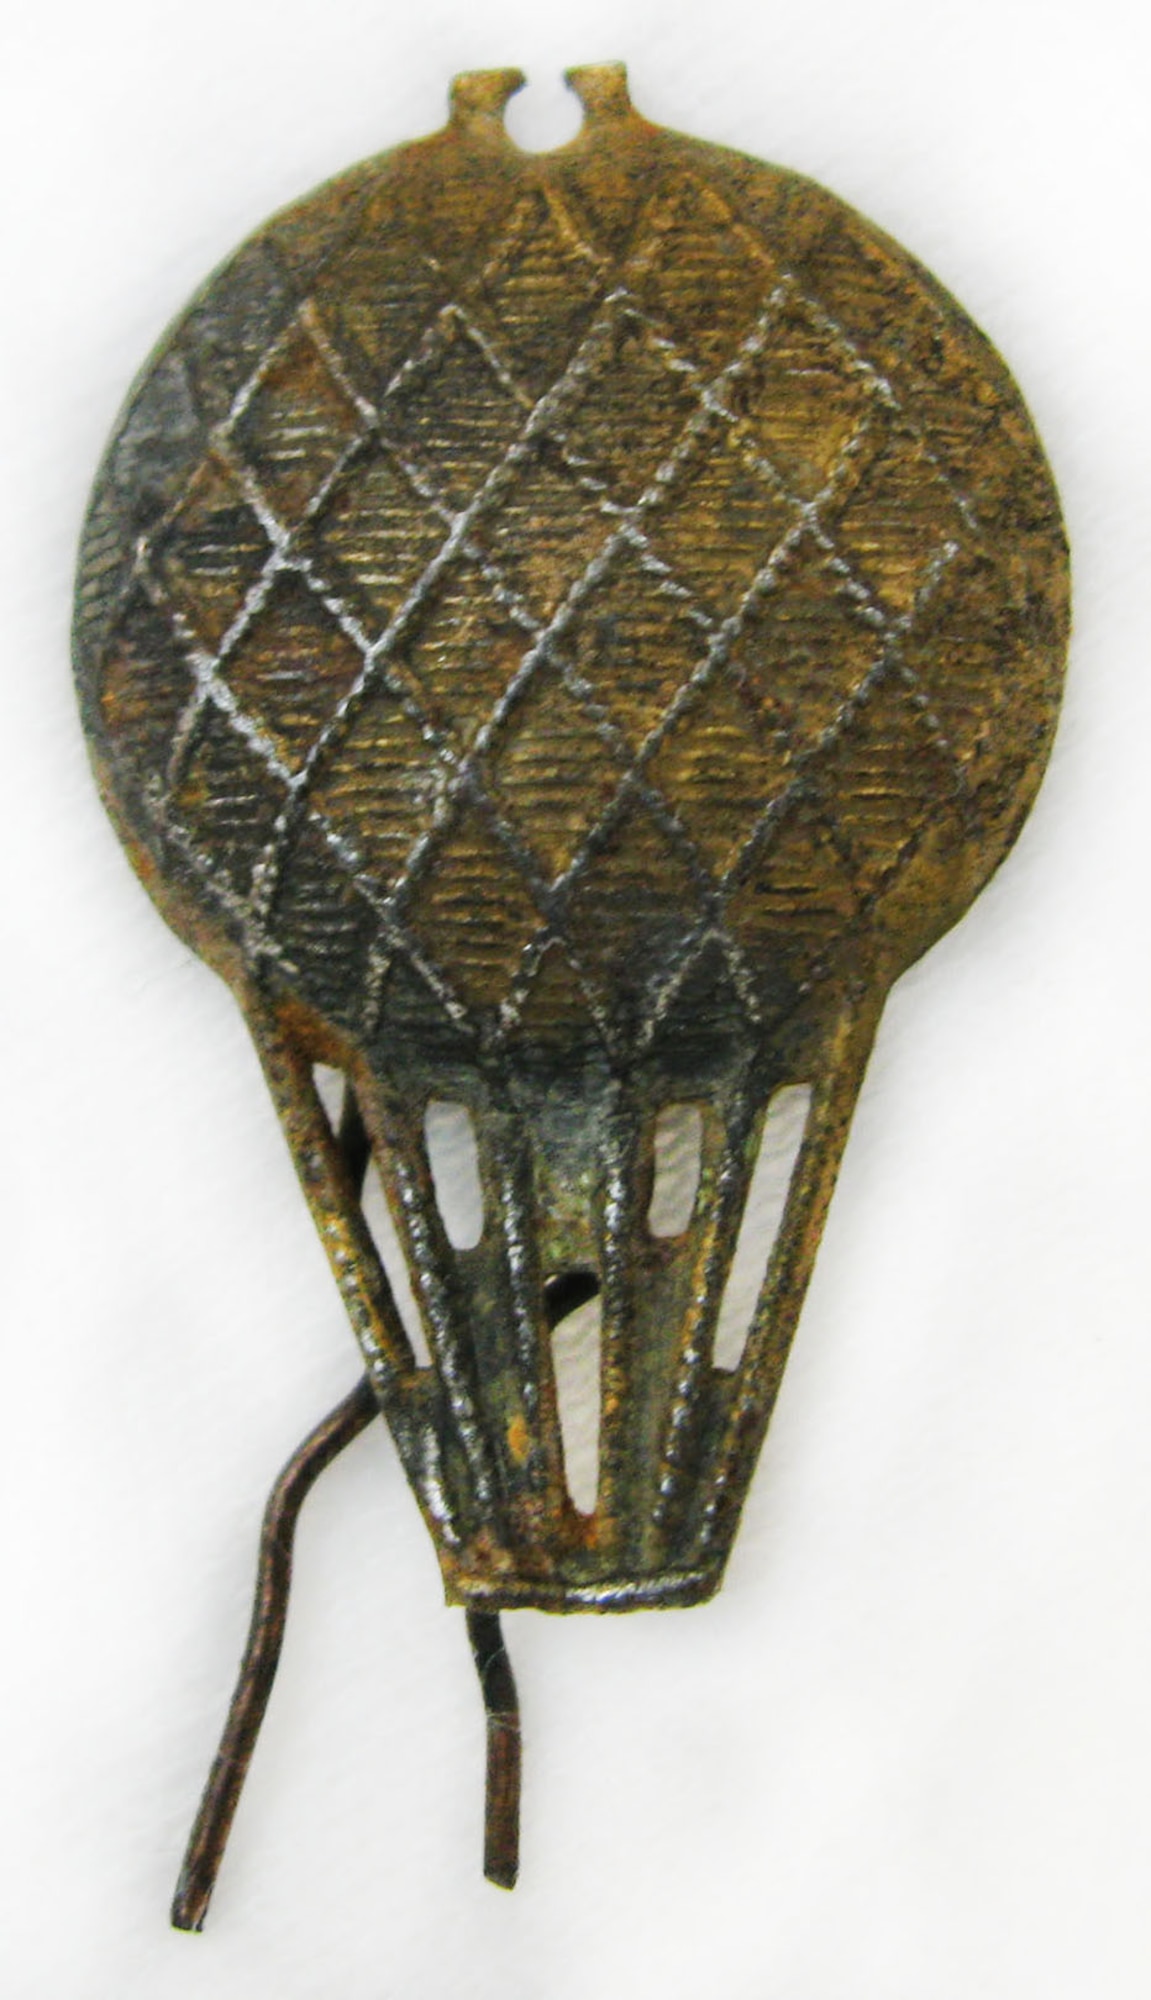 This insignia was worn by members of the Balloon Corp of the Austro-Hungarian Army. The Austro-Hungarian Army was the combined military force of Austria and Hungary during World War I. (U.S. Air Force photo)